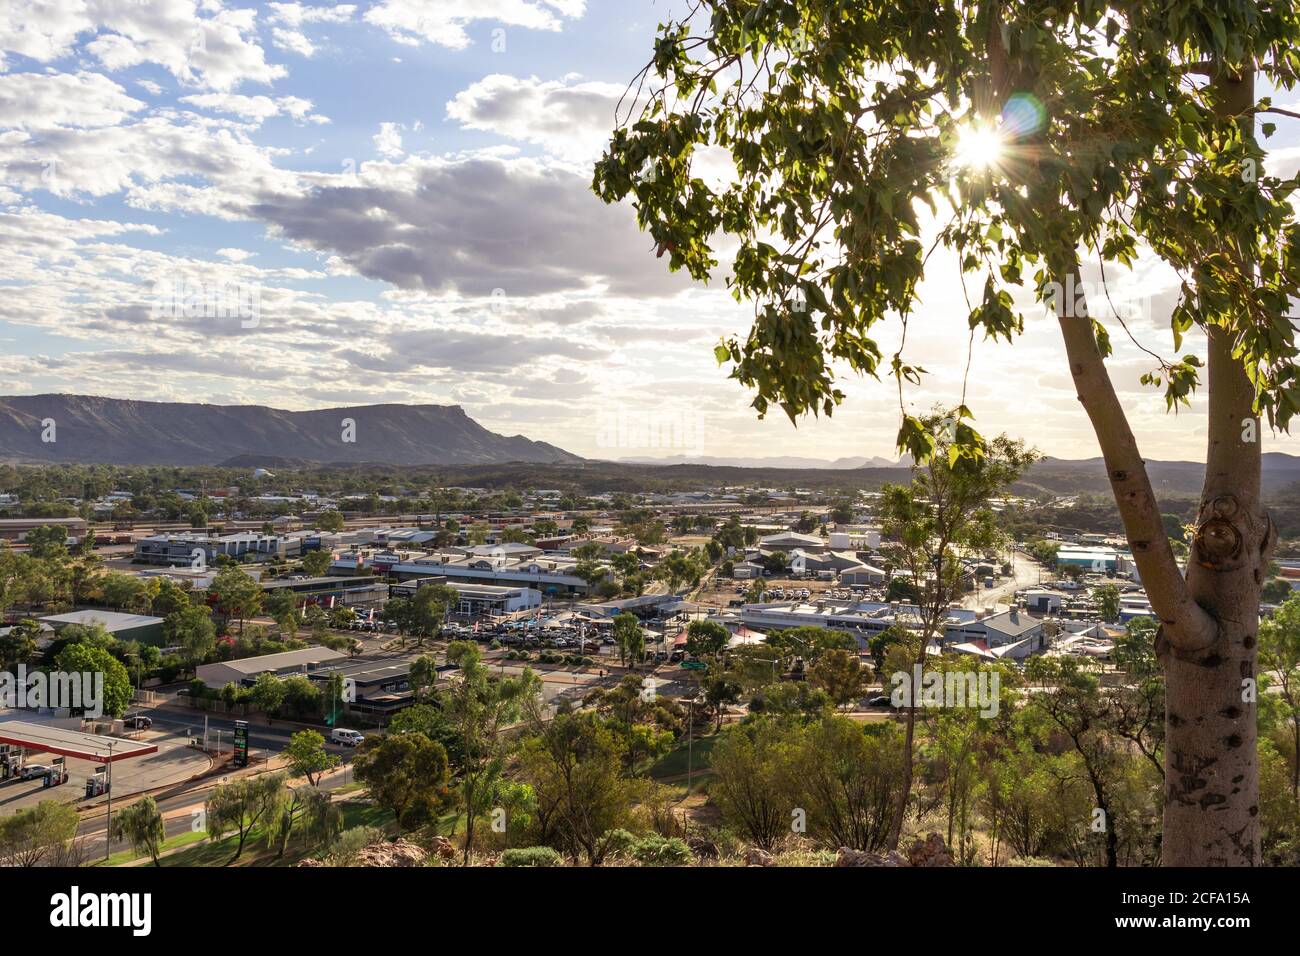 Views of Alice springs township from Anzac hill. Mountains MacDonnell ranges at background. Sun shining among the tree leaves at sunset time. Cloudy s Stock Photo